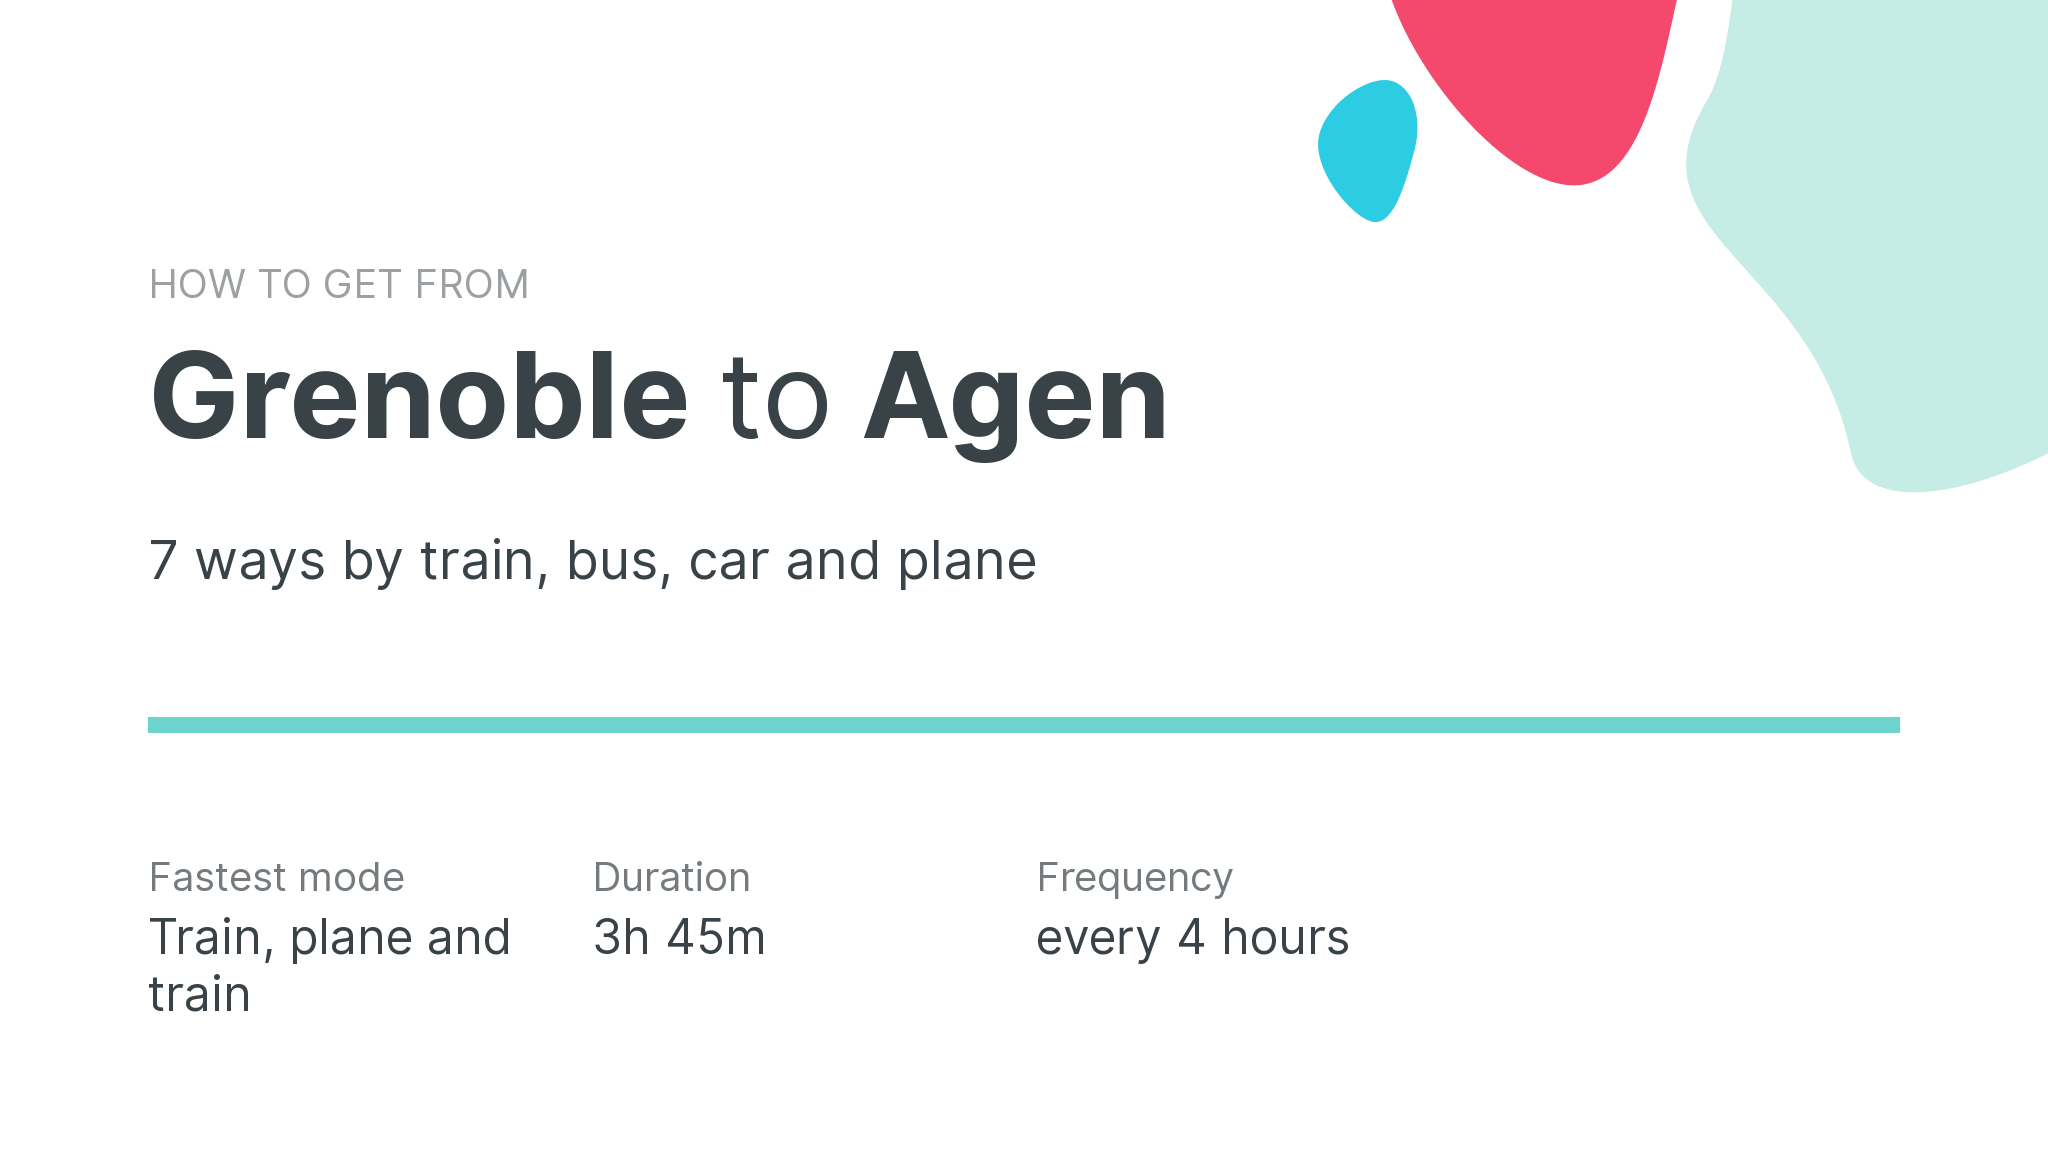 How do I get from Grenoble to Agen